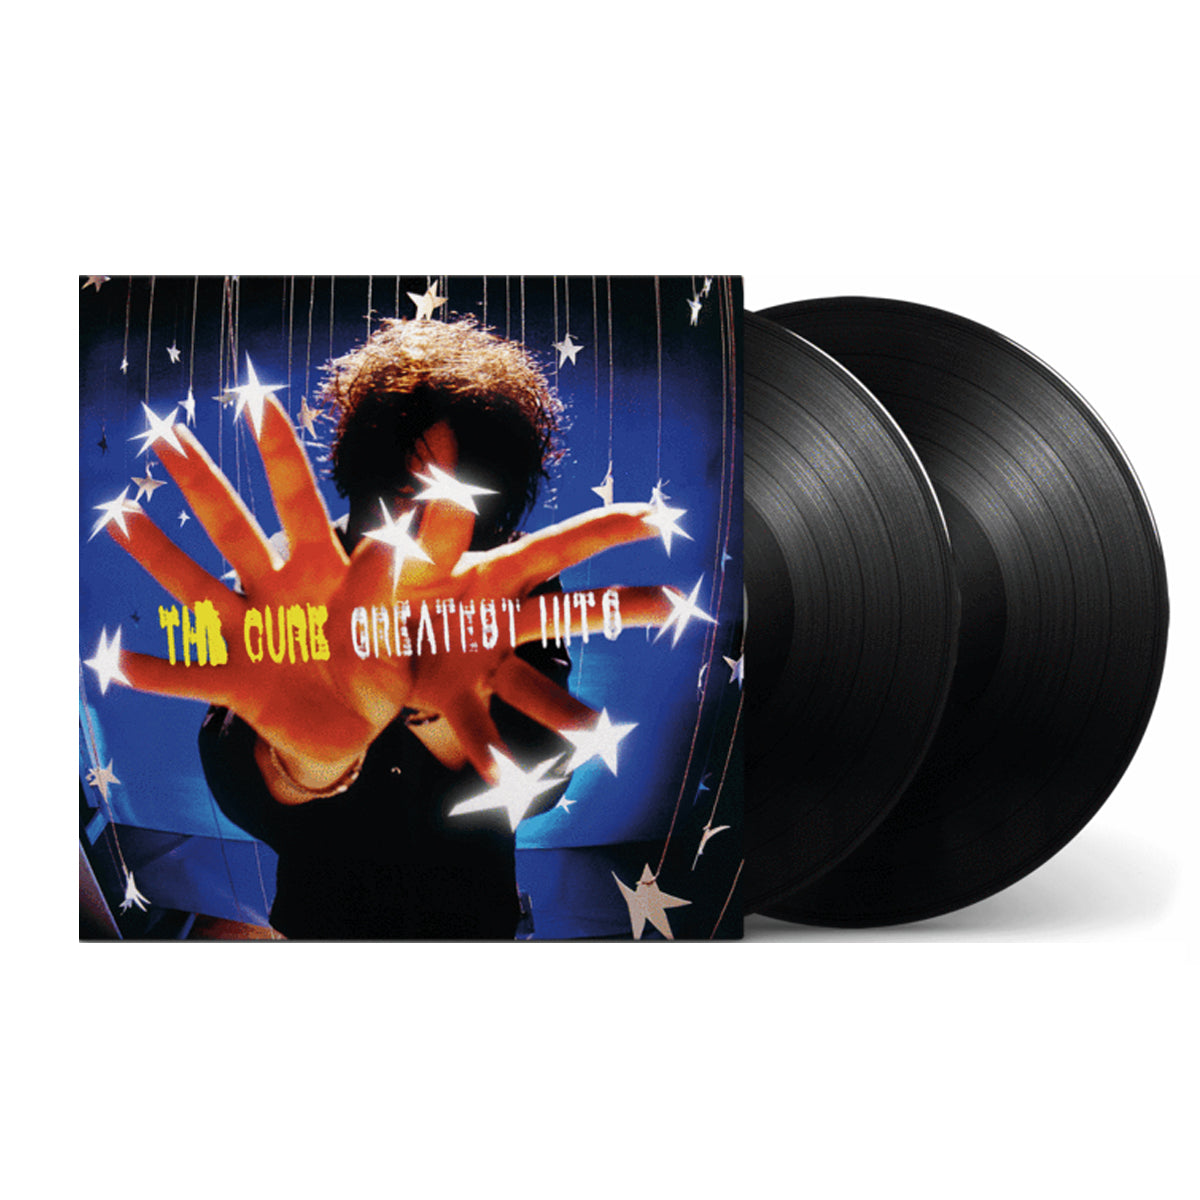 The Cure: Greatest Hits (remastered) (180g) 2 LPs – Black Vinyl